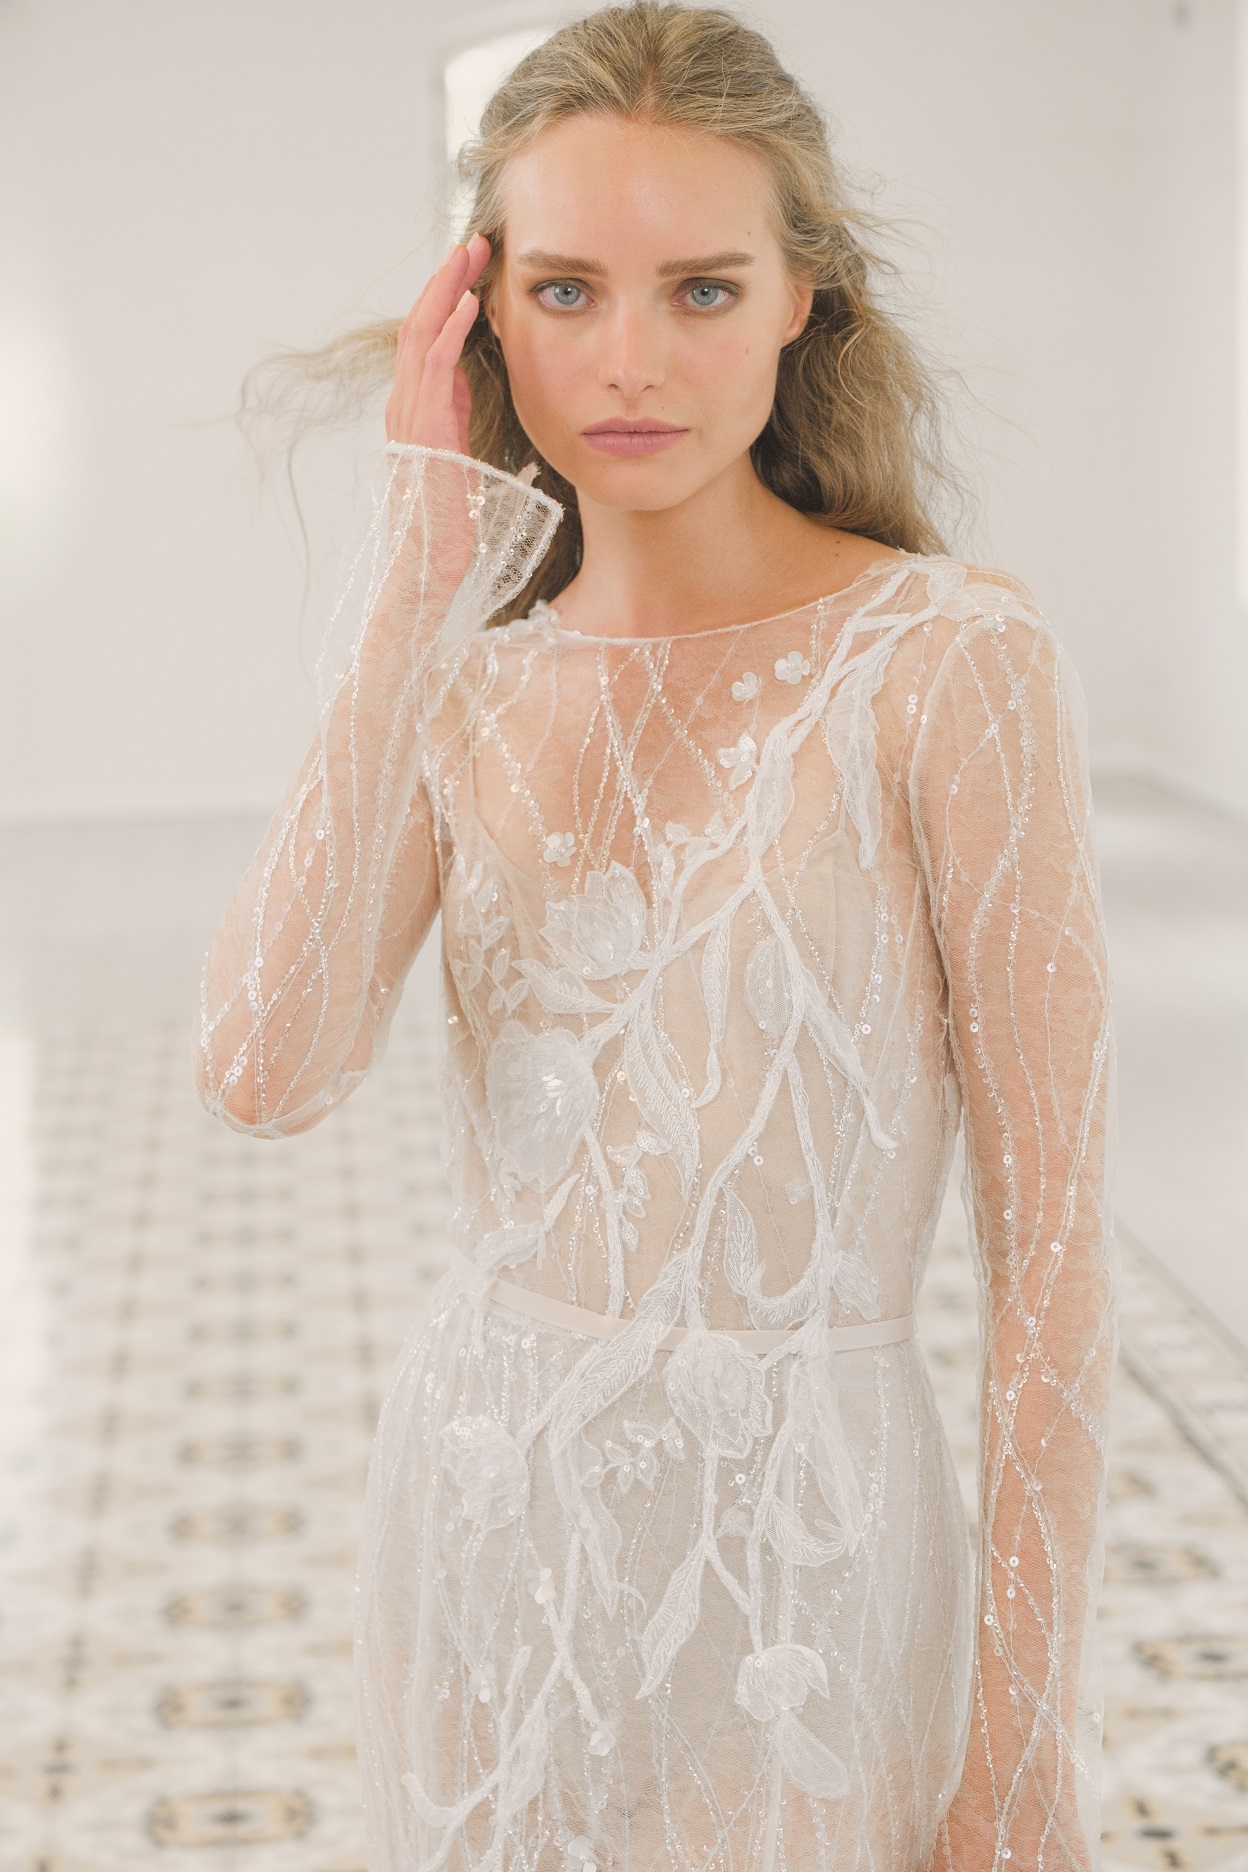 A sheer long sleeve wedding gown designed by Mira Zwillinger with shimmering flowers and a slim fit.